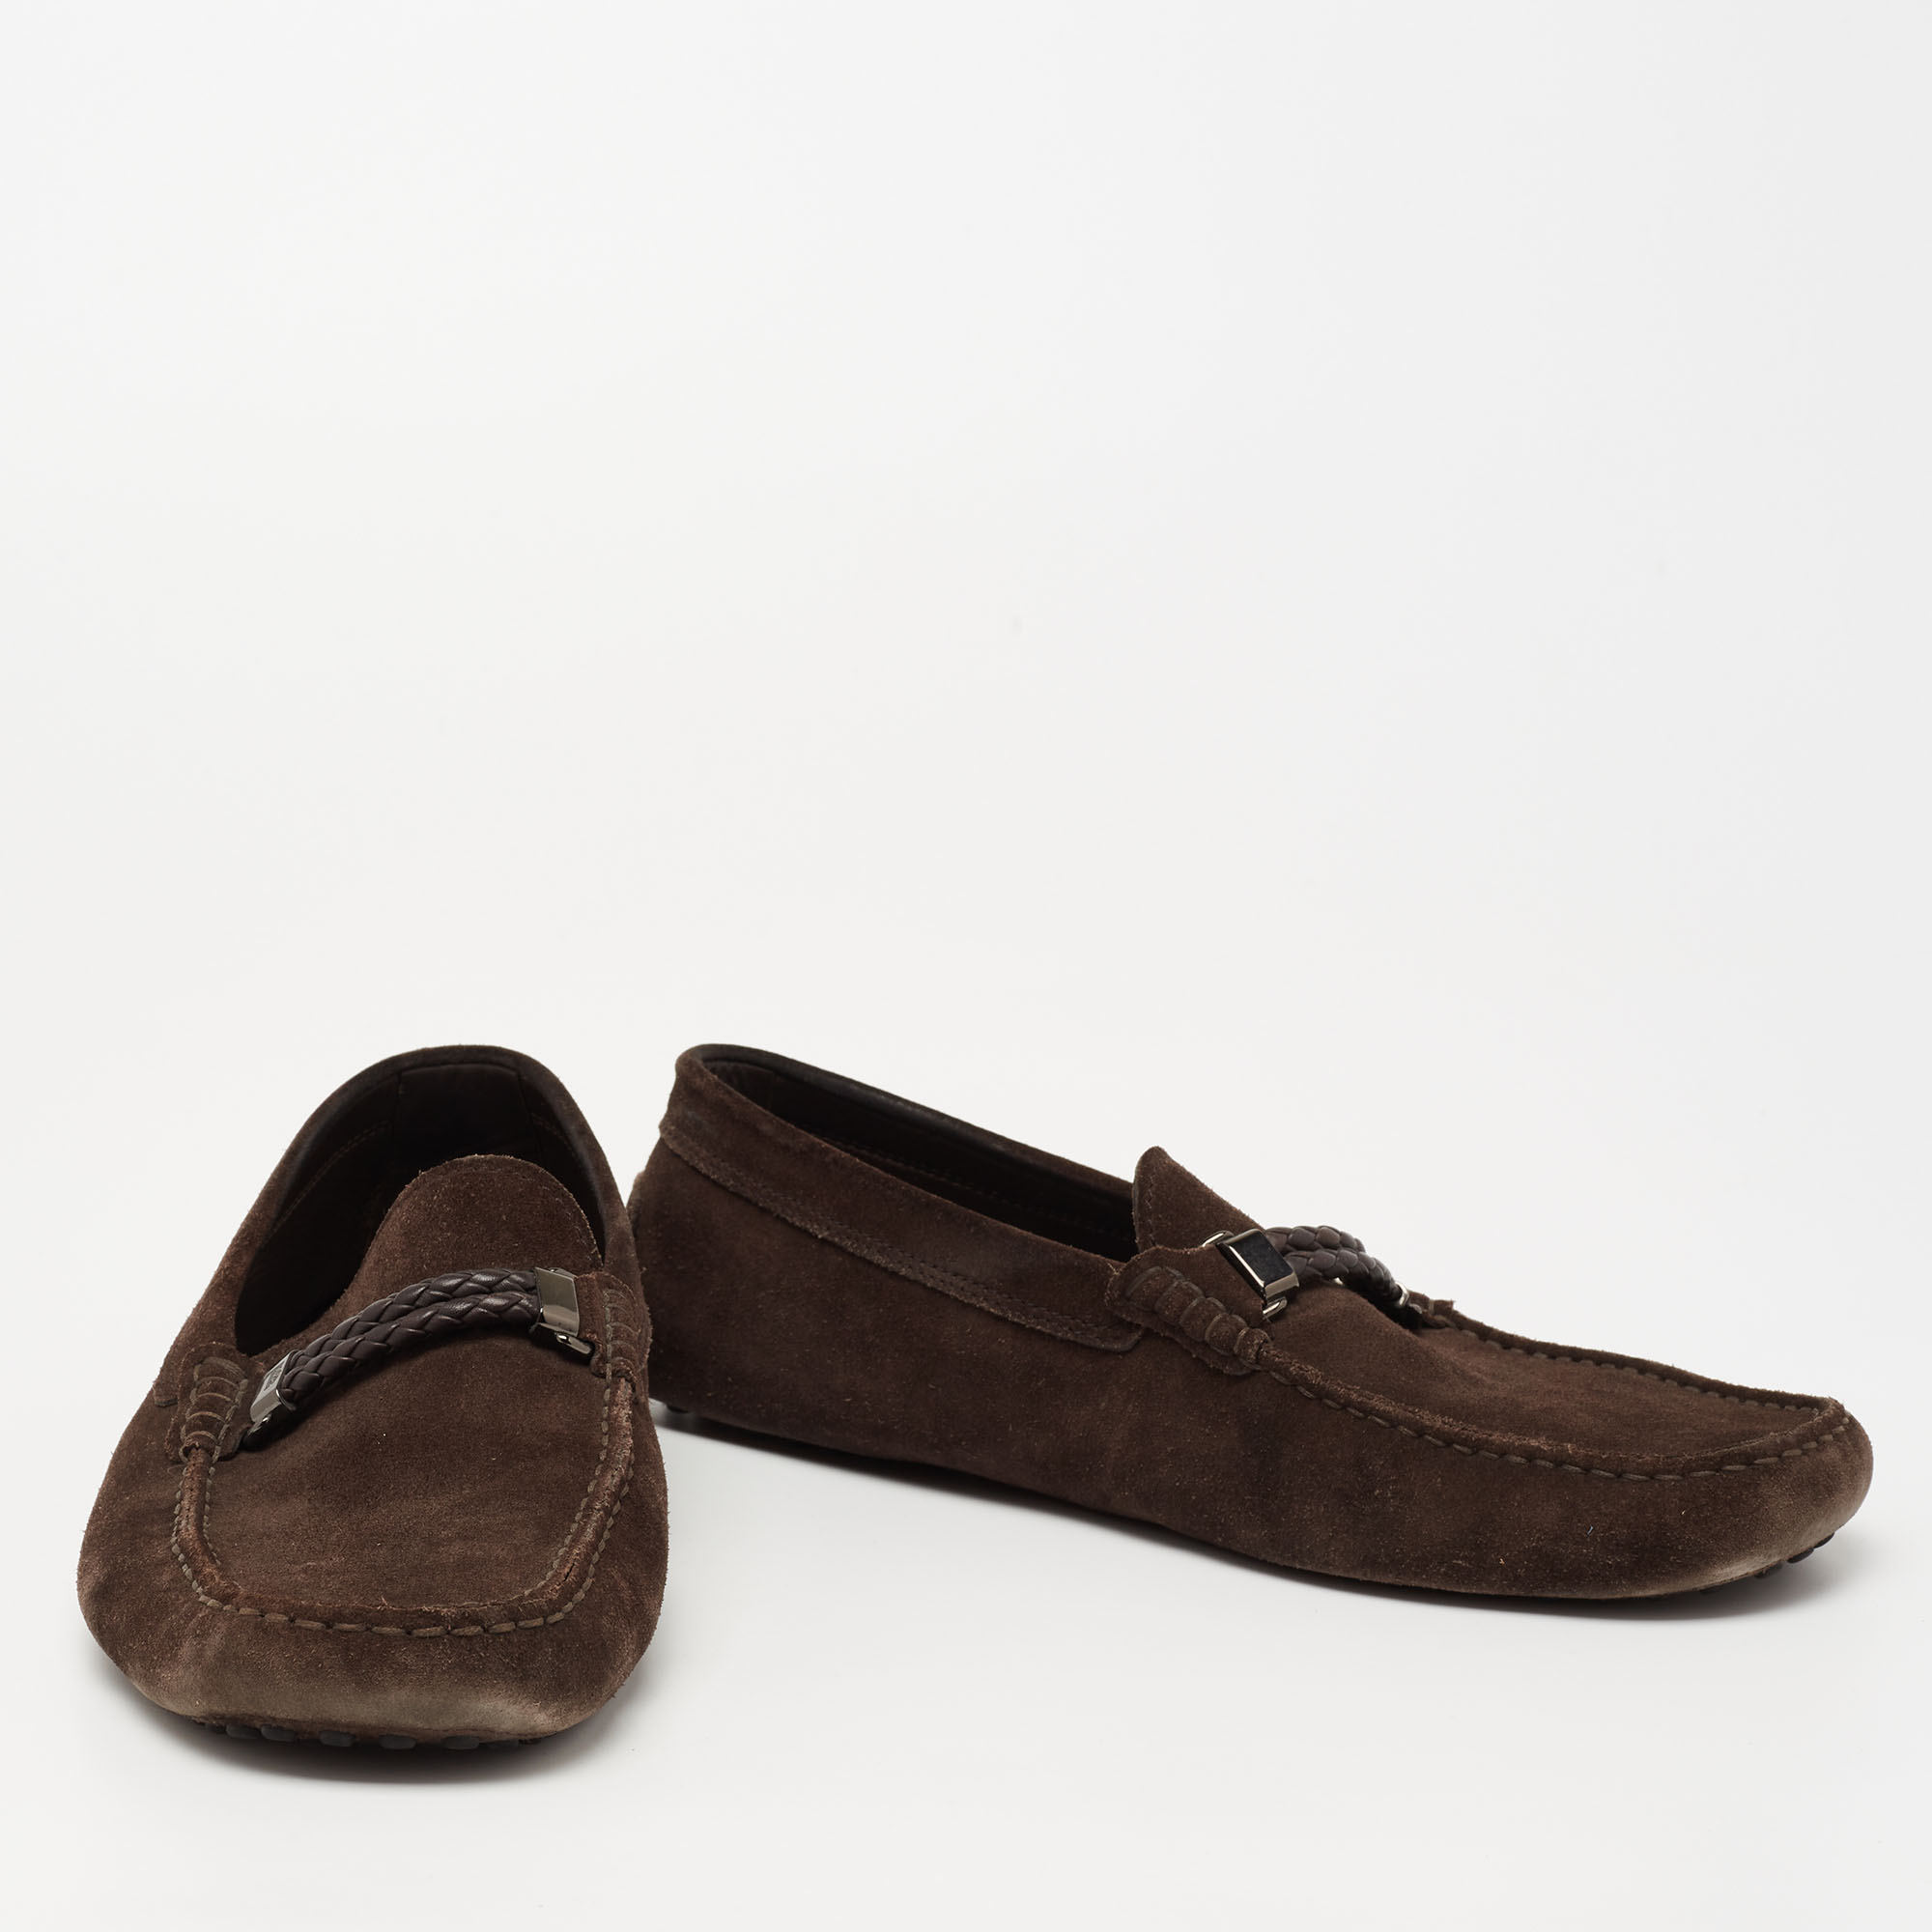 Tod's Dark Brown Suede Slip On Loafers Size 44.5